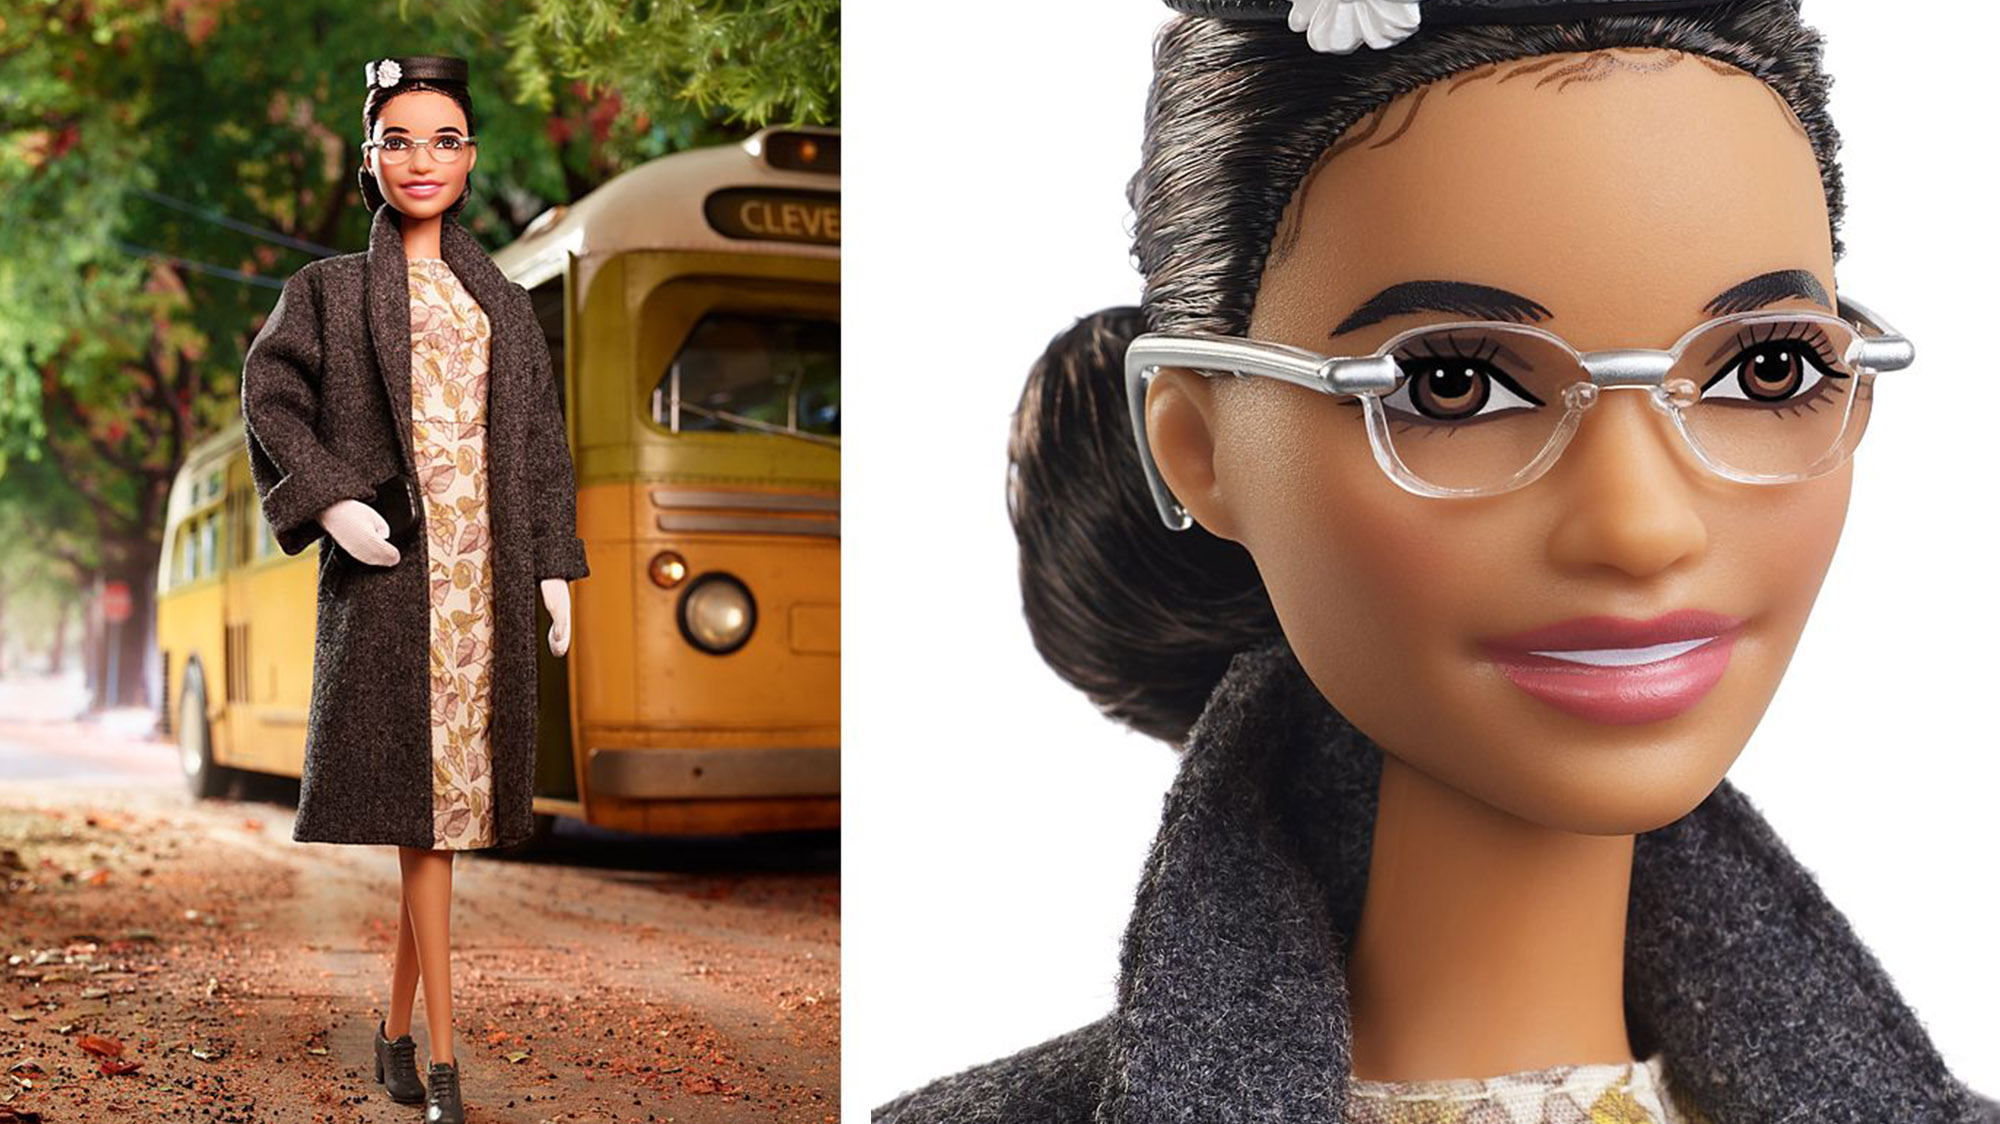 where to buy rosa parks barbie